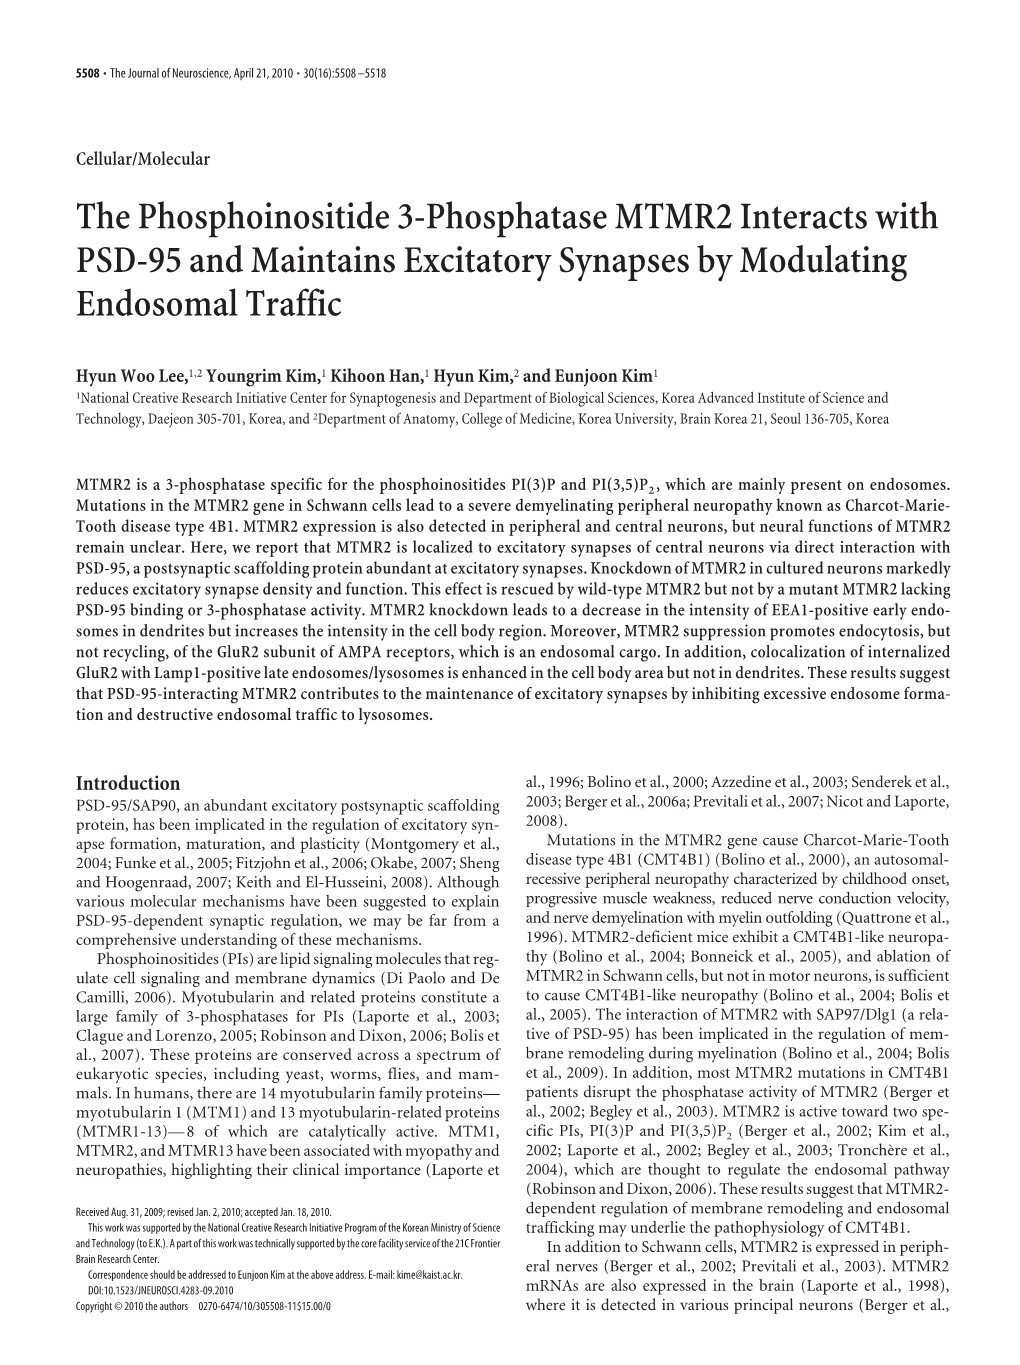 The Phosphoinositide 3-Phosphatase MTMR2 Interacts with PSD-95 and Maintains Excitatory Synapses by Modulating Endosomal Traffic